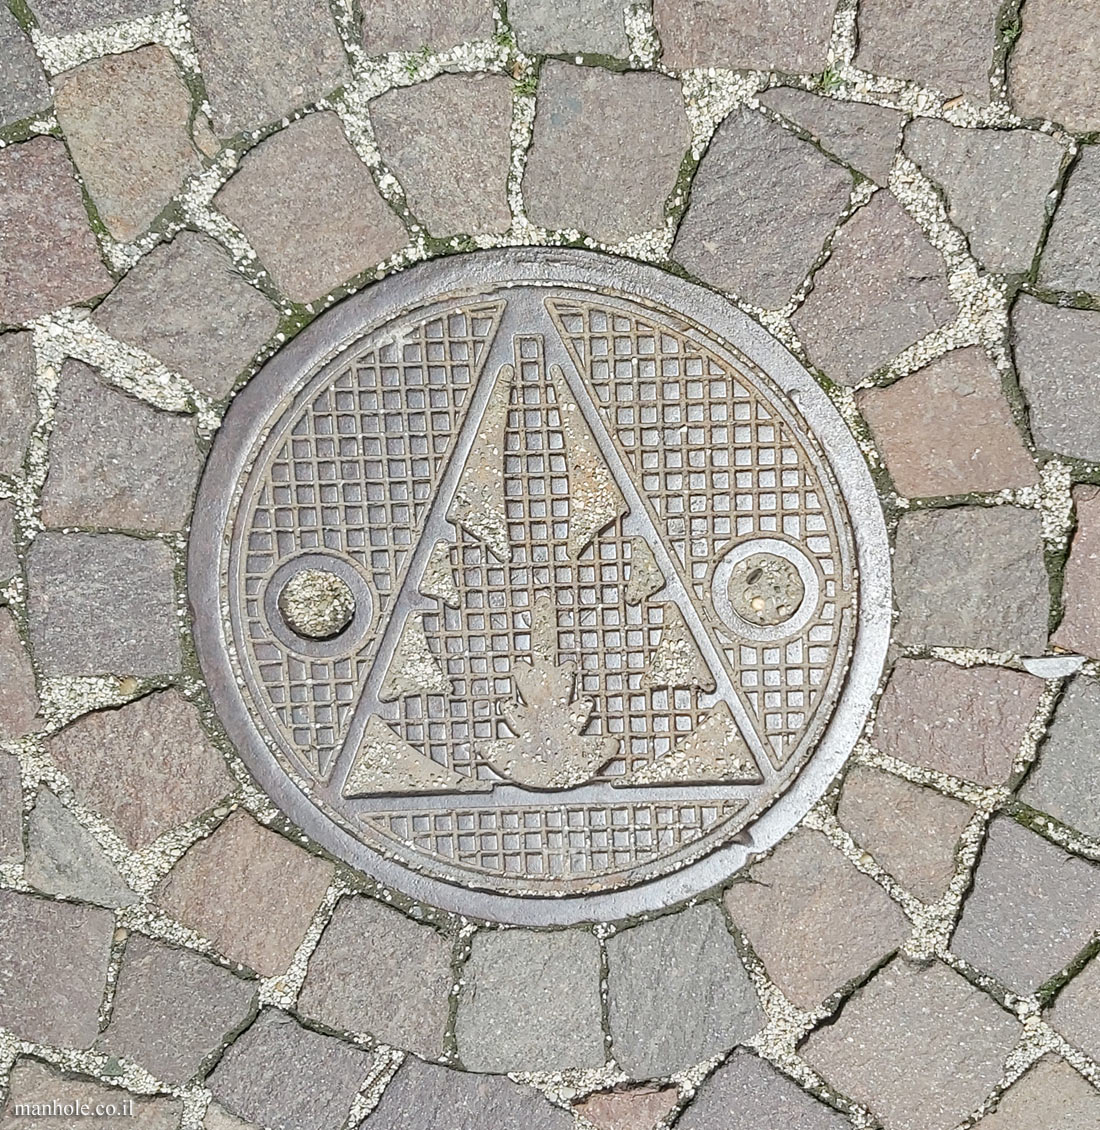 Budapest - A triangle surrounded by a circle with an illustration of a leaf